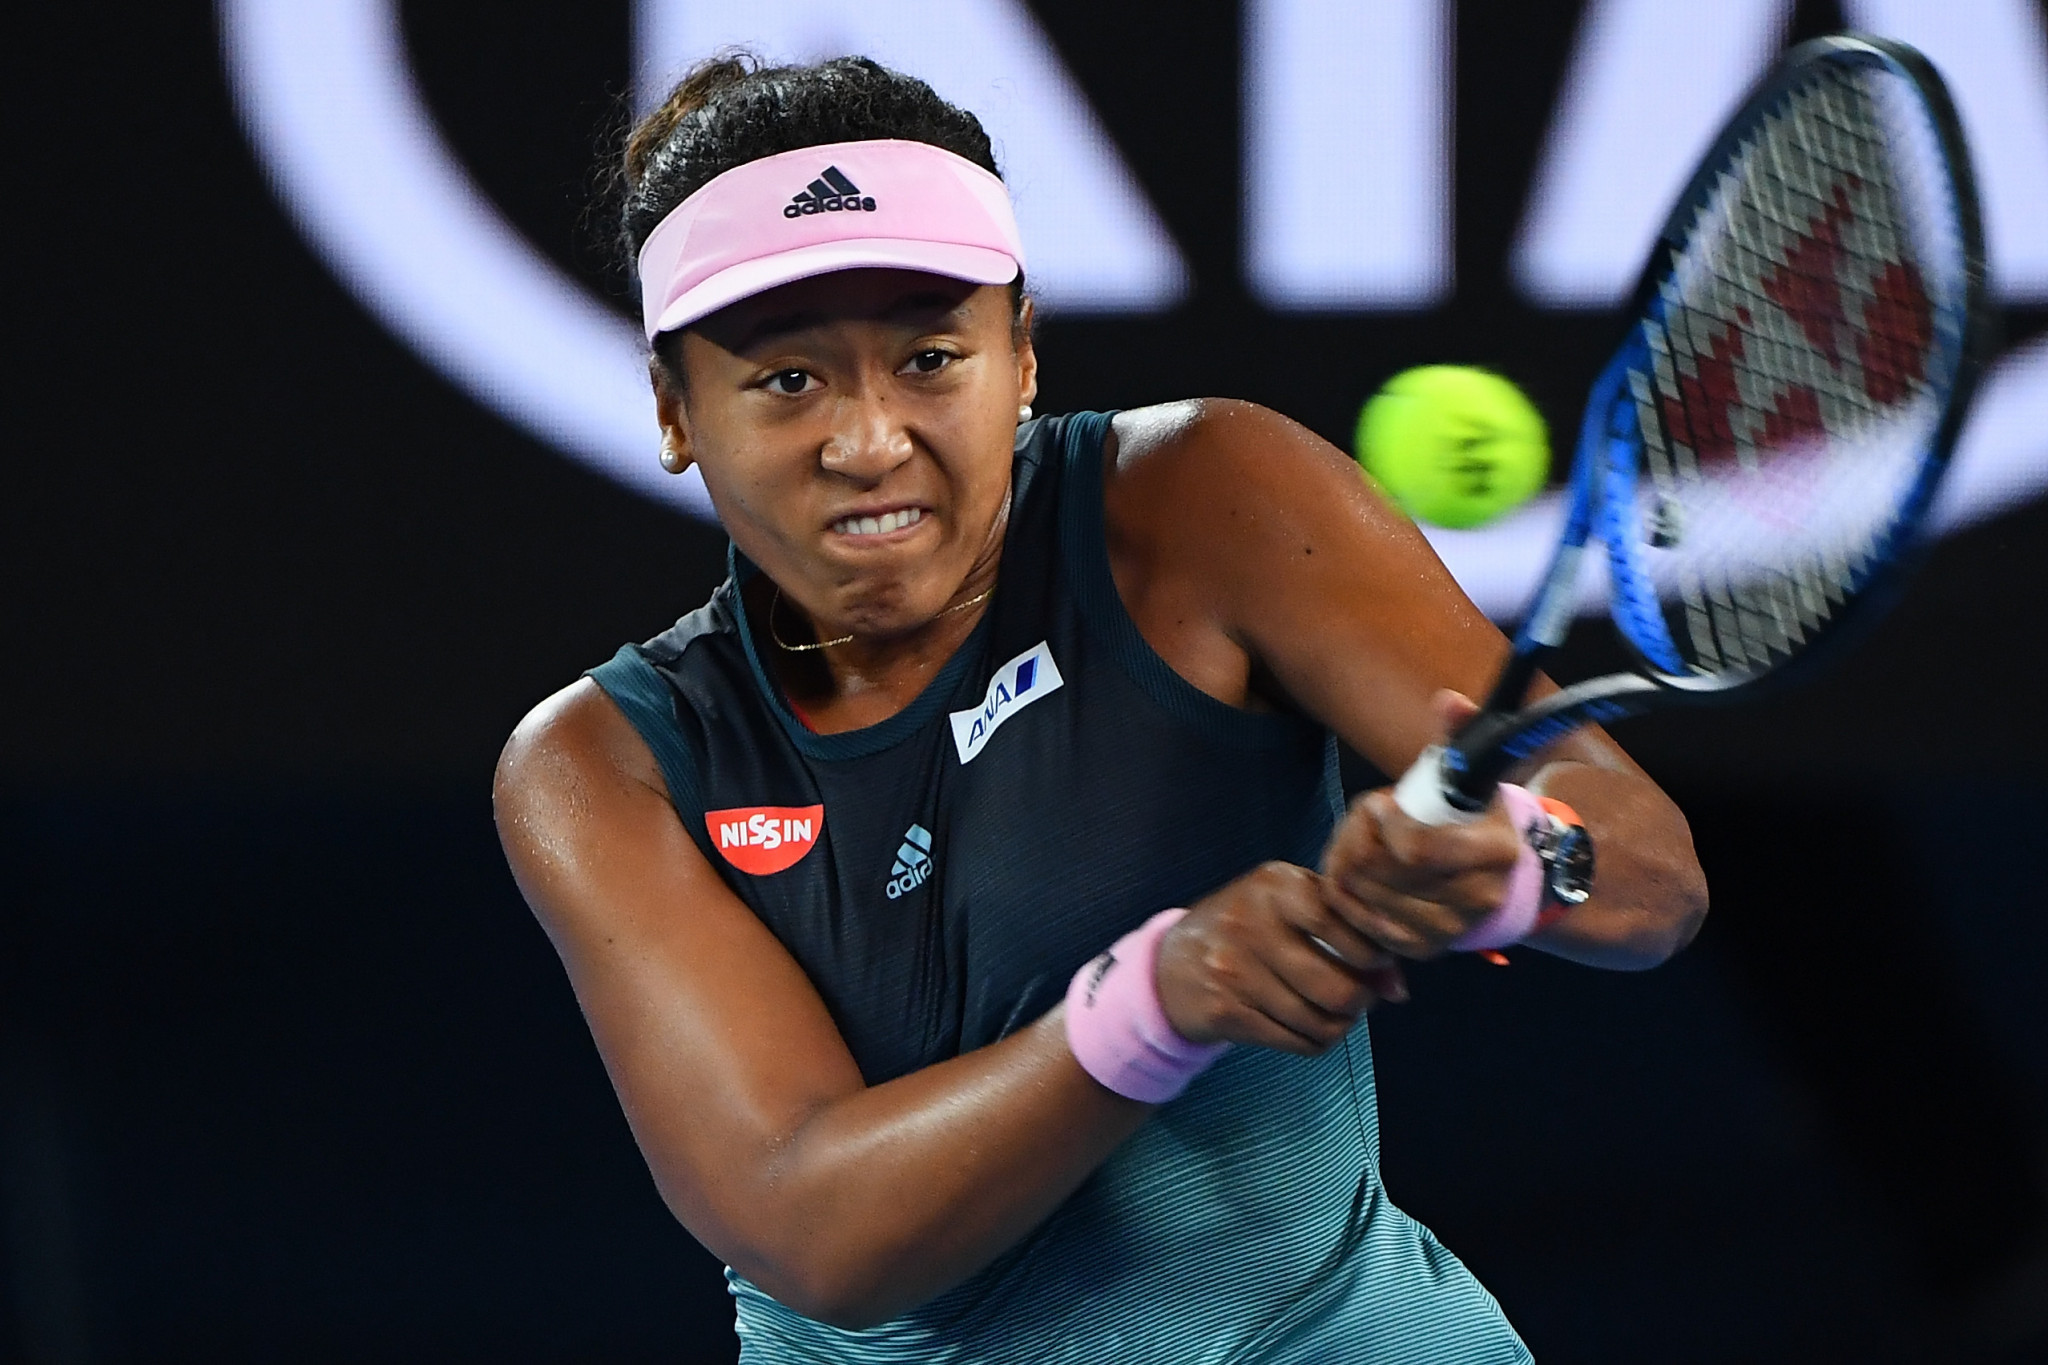 Japan's Naomi Osaka is through to a second consecutive Grand Slam final after beating Czech Republic's Karolína Plíšková in the last four ©Getty Images